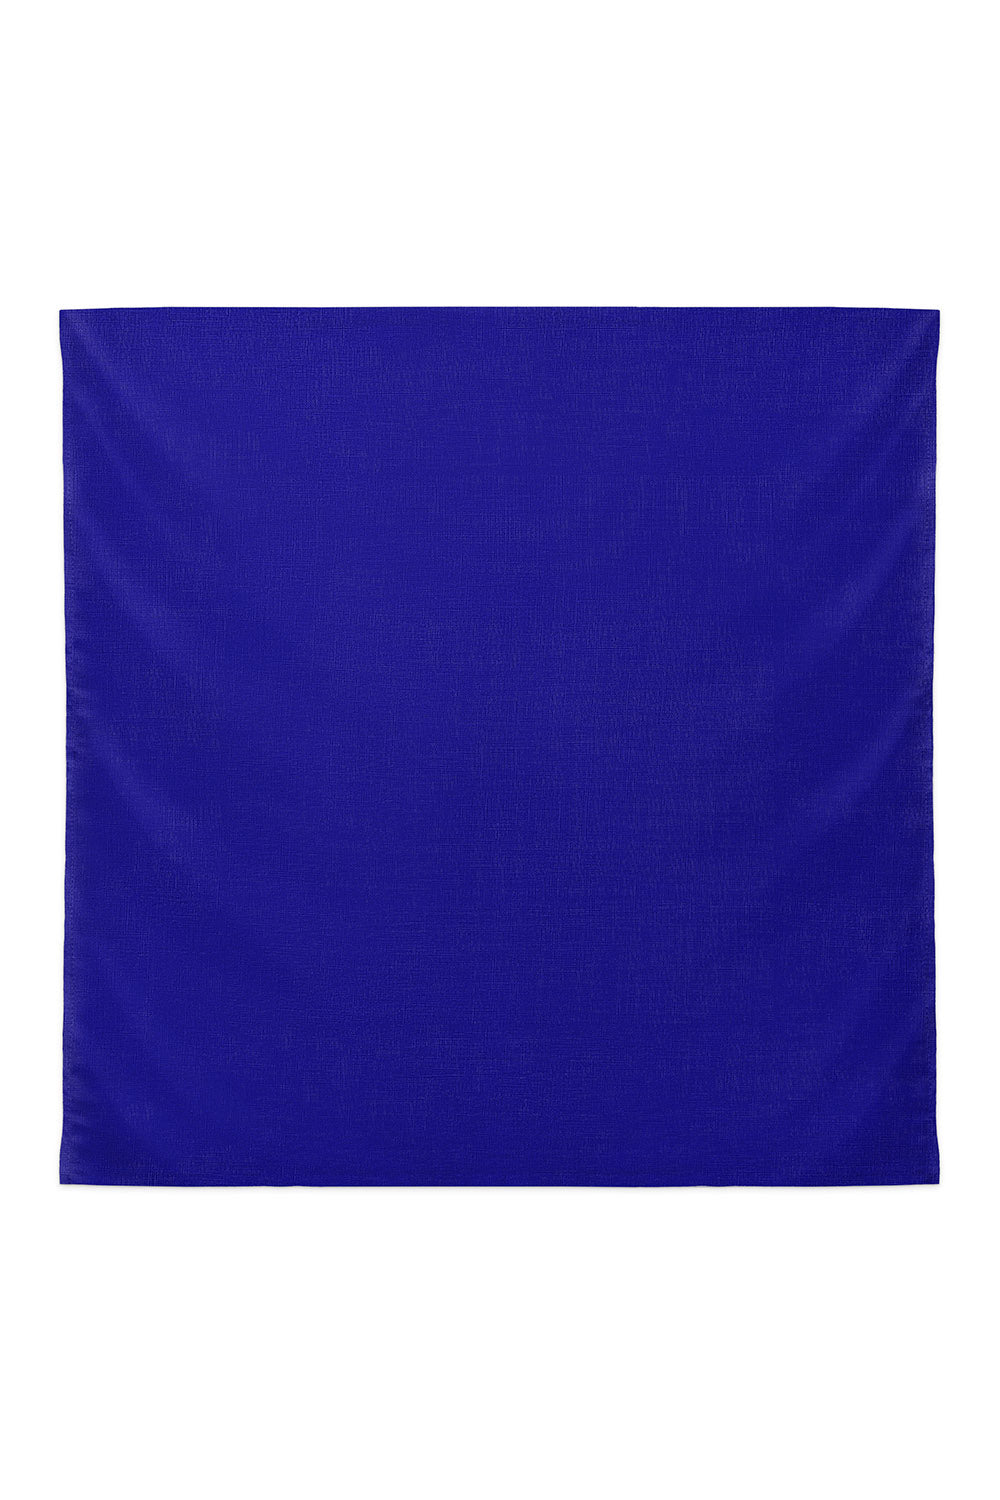 RR Basic Cotton Scarf in Royal Blue